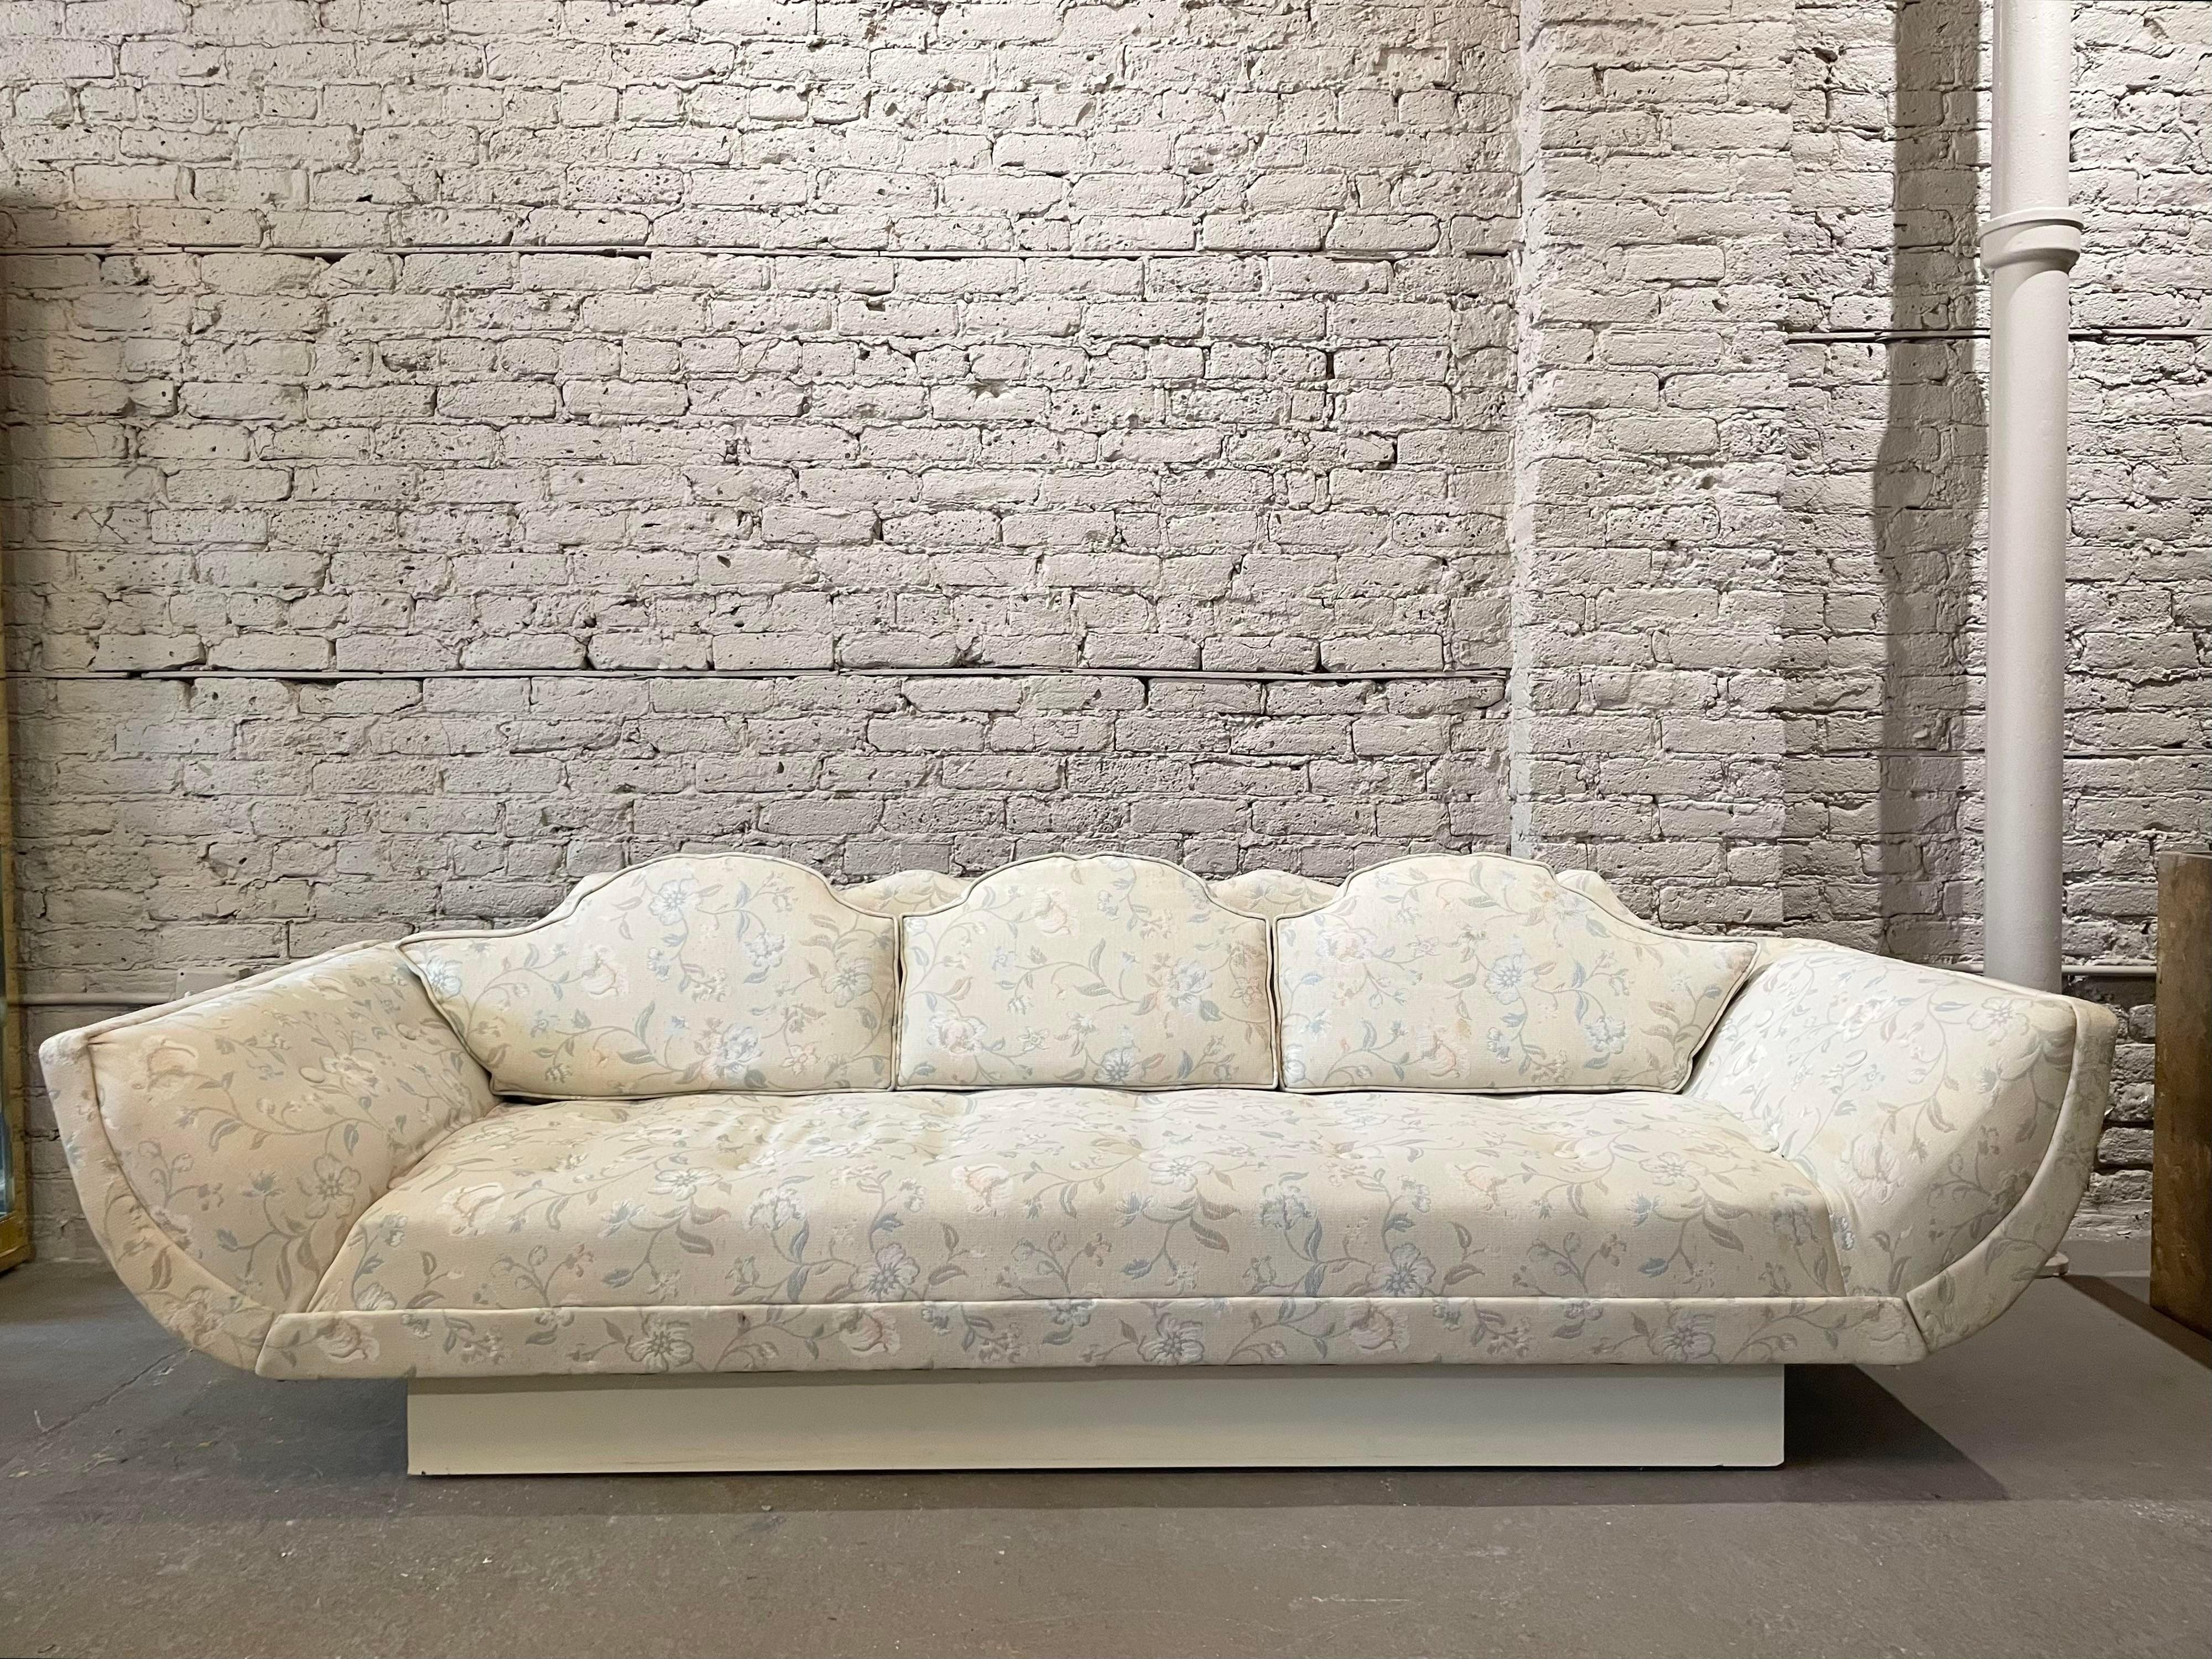 Amazing sofa with the coolest lines. In the manner of Adrian Pearsall but no tags to indicate so. Use as is or redo in your favorite fabric. The plinth base is painted wood.